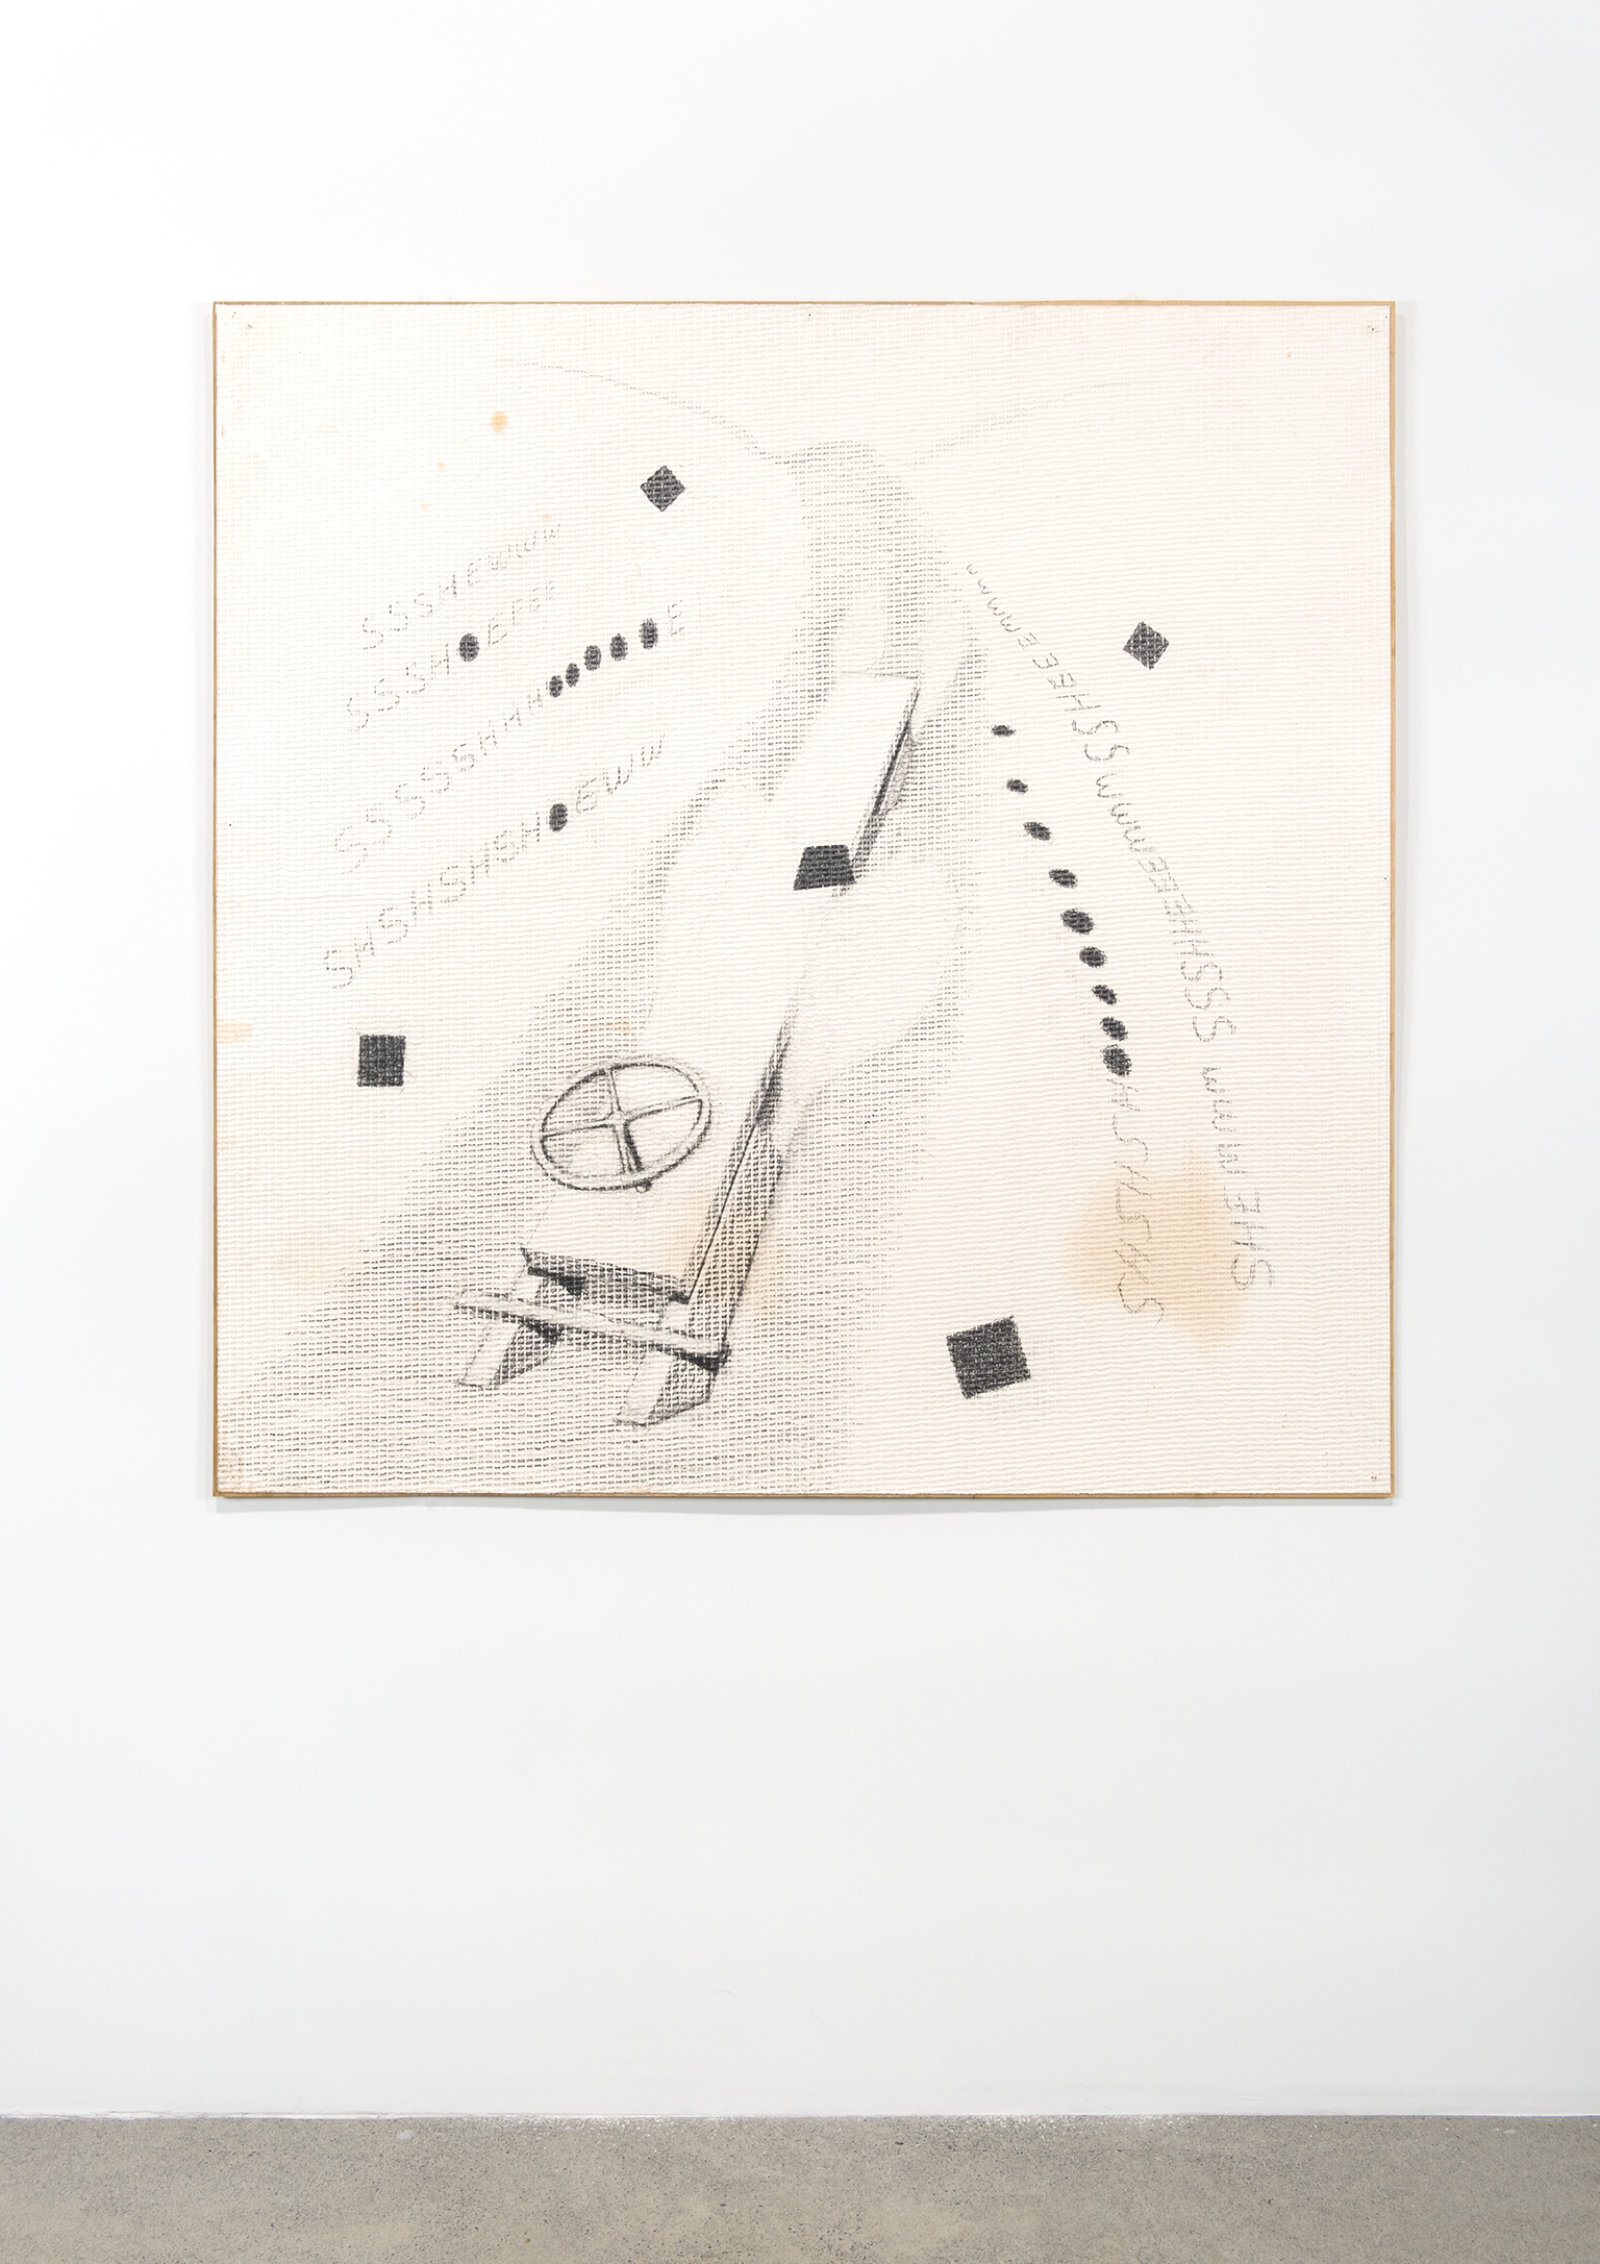 Jerry Pethick, Bob Sled, 1989, charcoal on paper, 57 x 58 in. (144 x 142 cm)